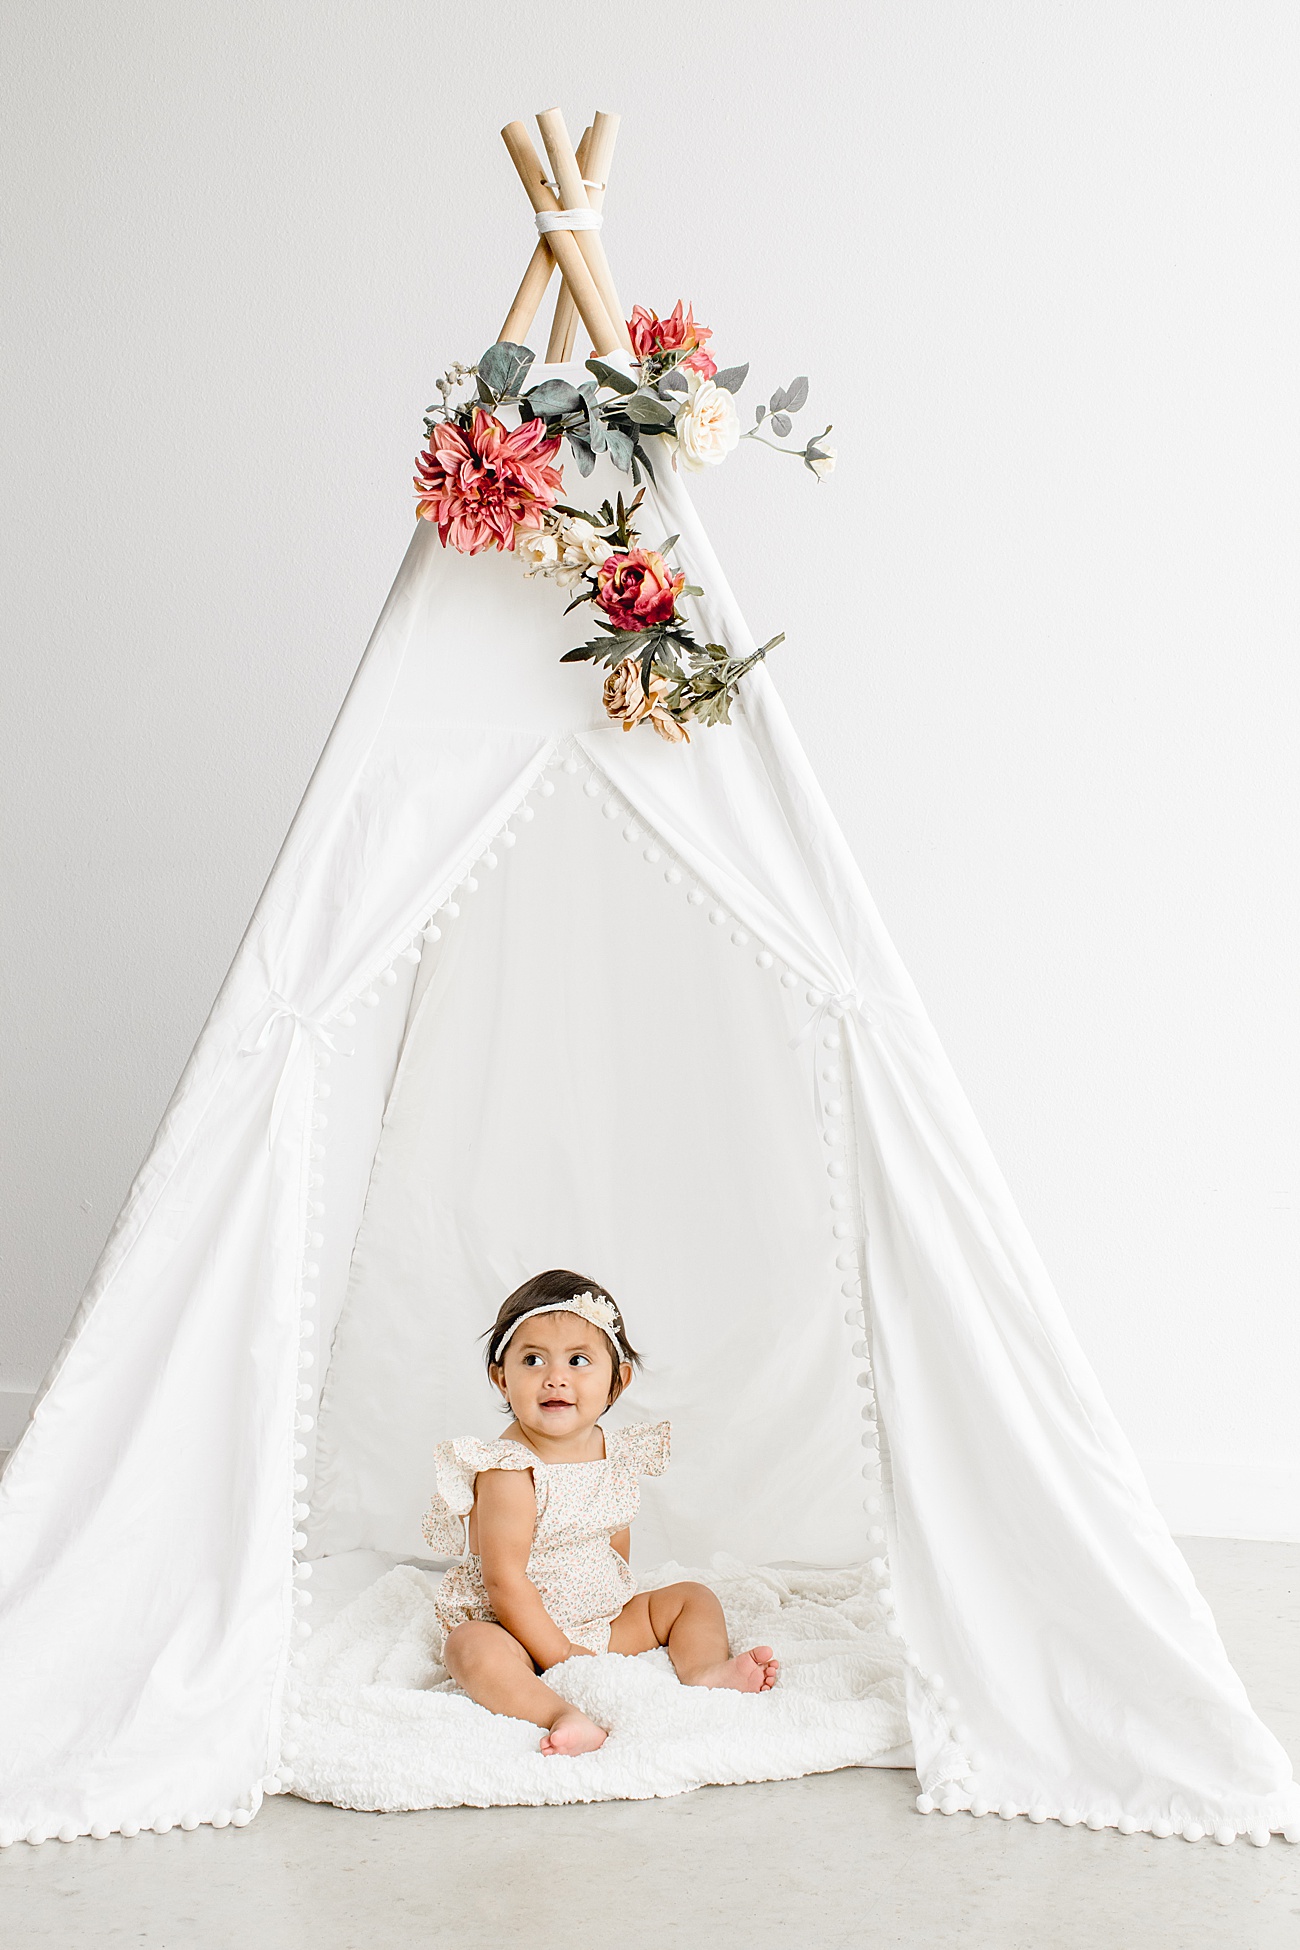 Little girl sitting in white teepee with floral decor during first birthday milestone photos in Austin Texas. Photo by Sana Ahmed Photography.